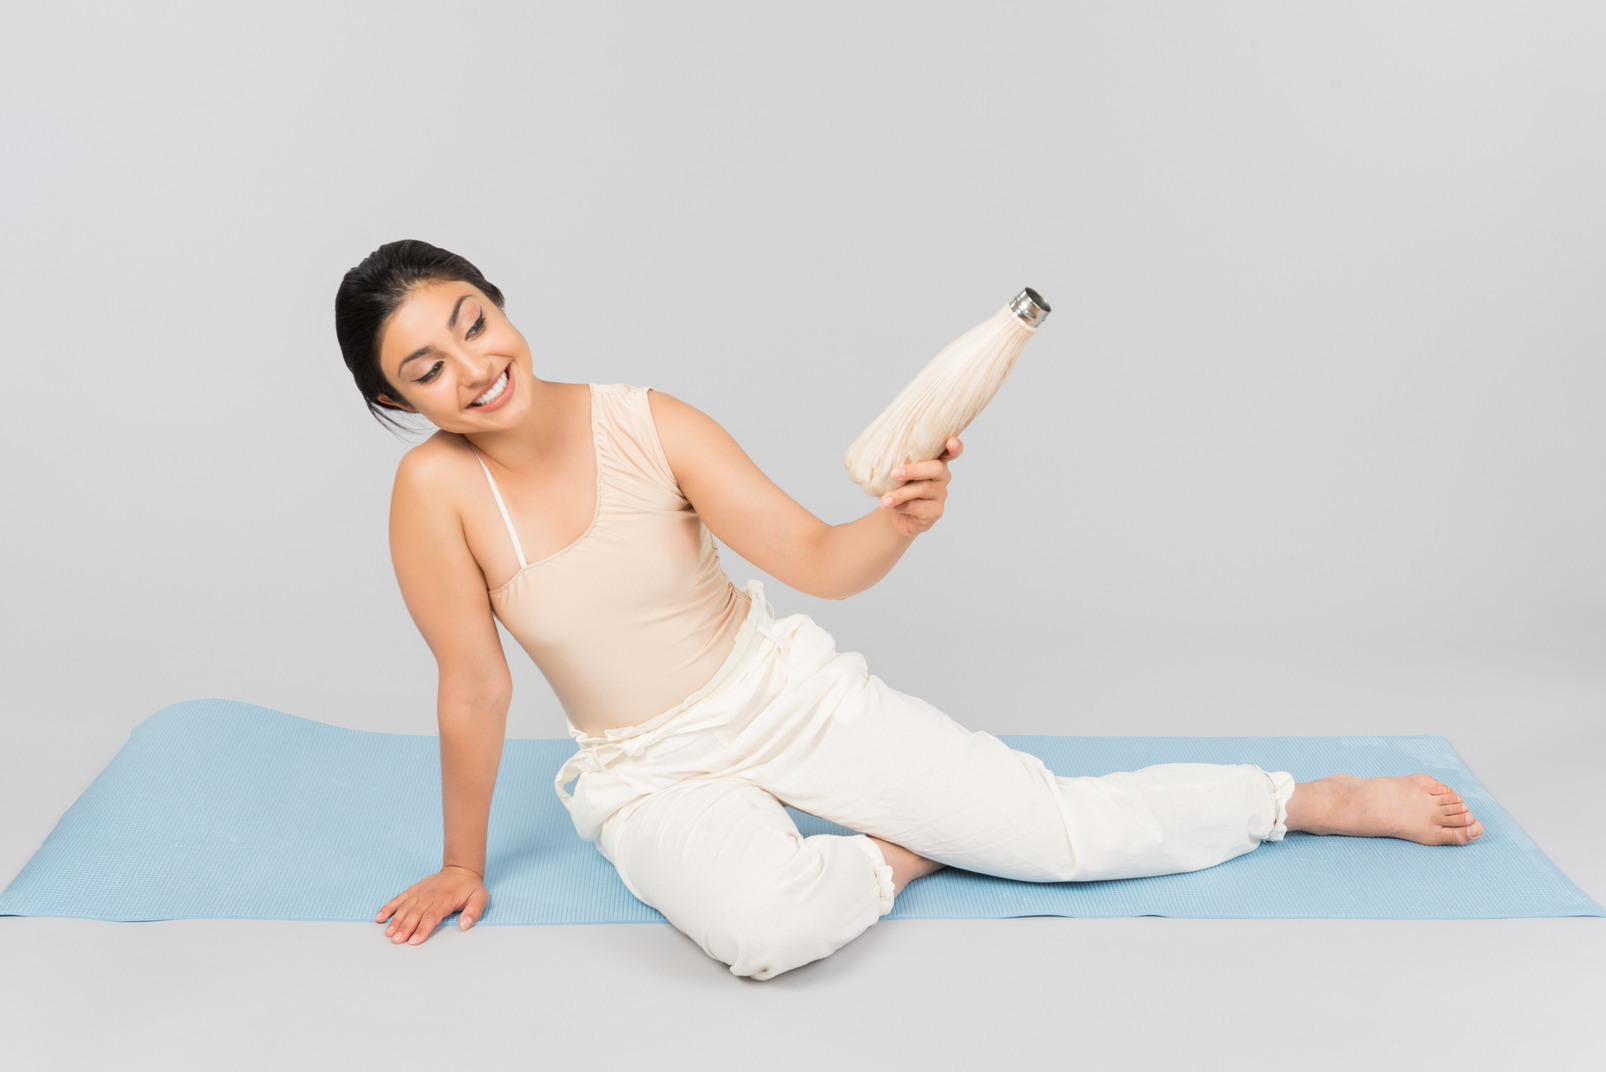 Young indian woman sitting on yoga mat and holding sport bottle